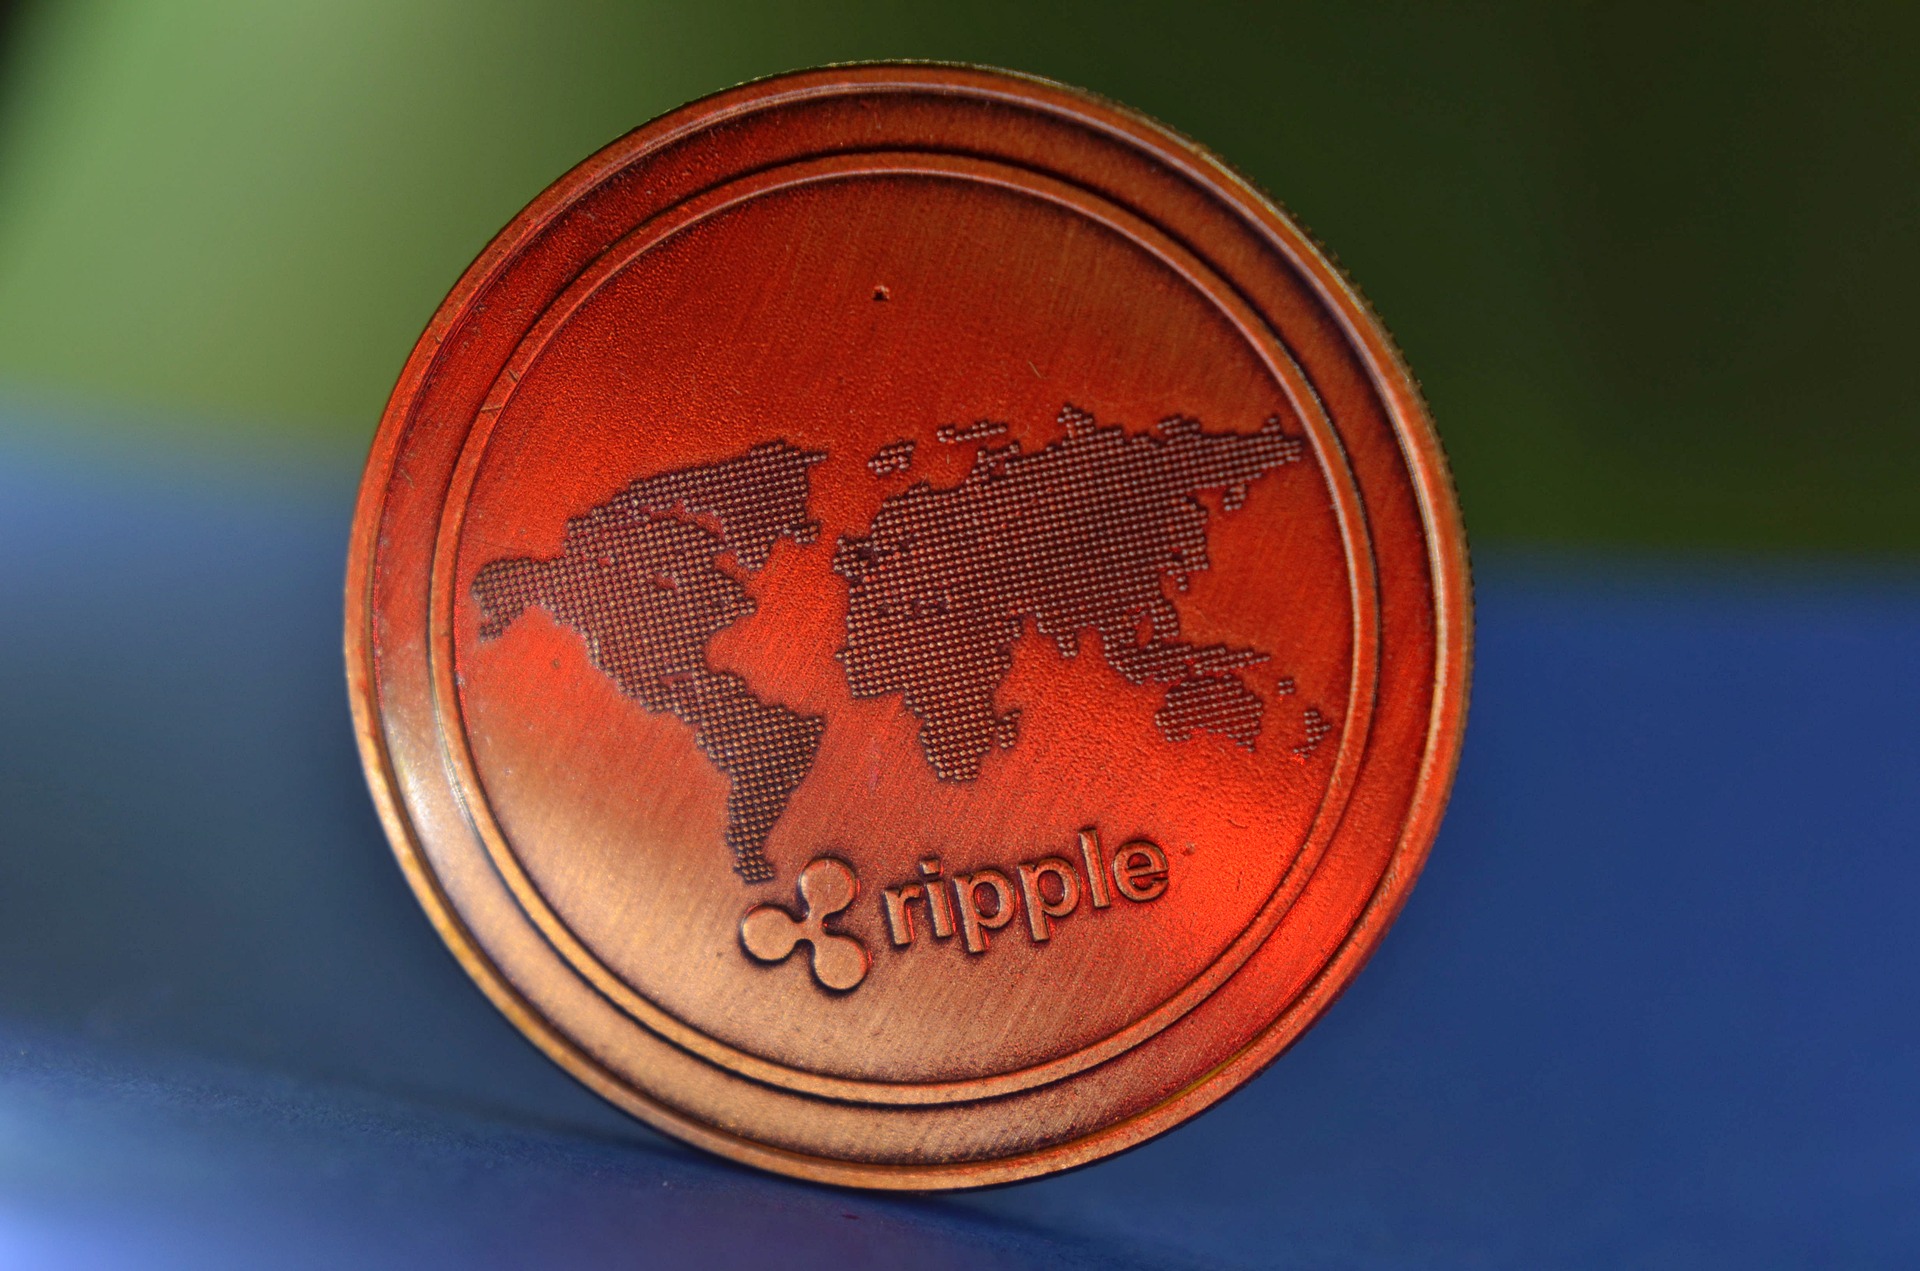 UK Payment Processing Firm Guavapay Partners With Ripple to Join RippleNet